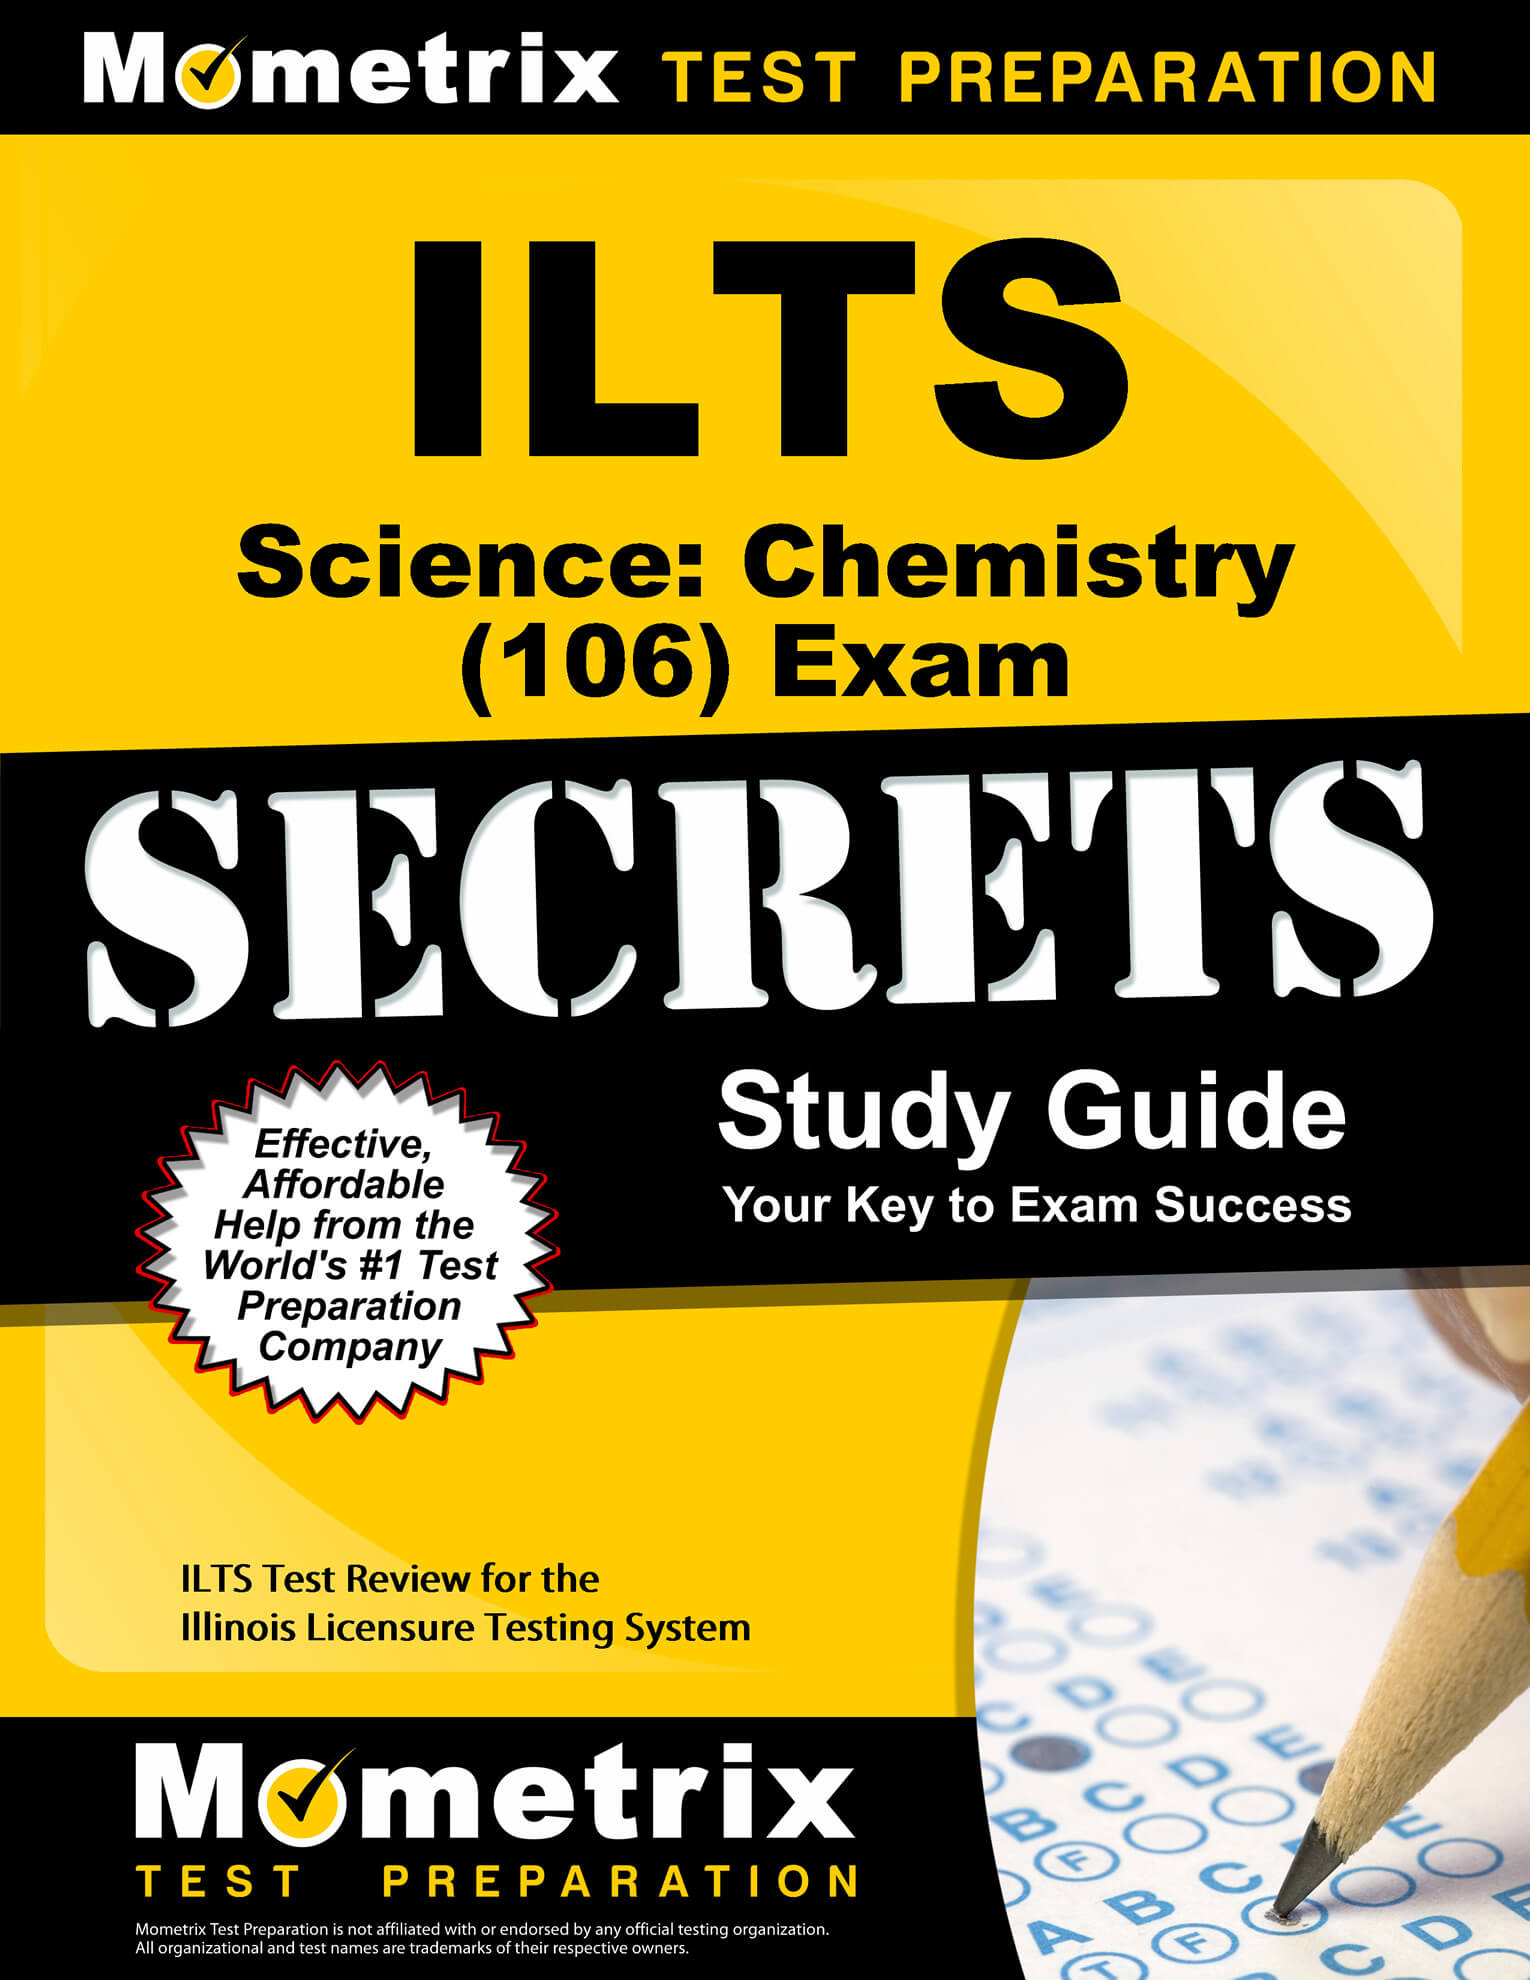 ILTS Science: Chemistry Study Guide